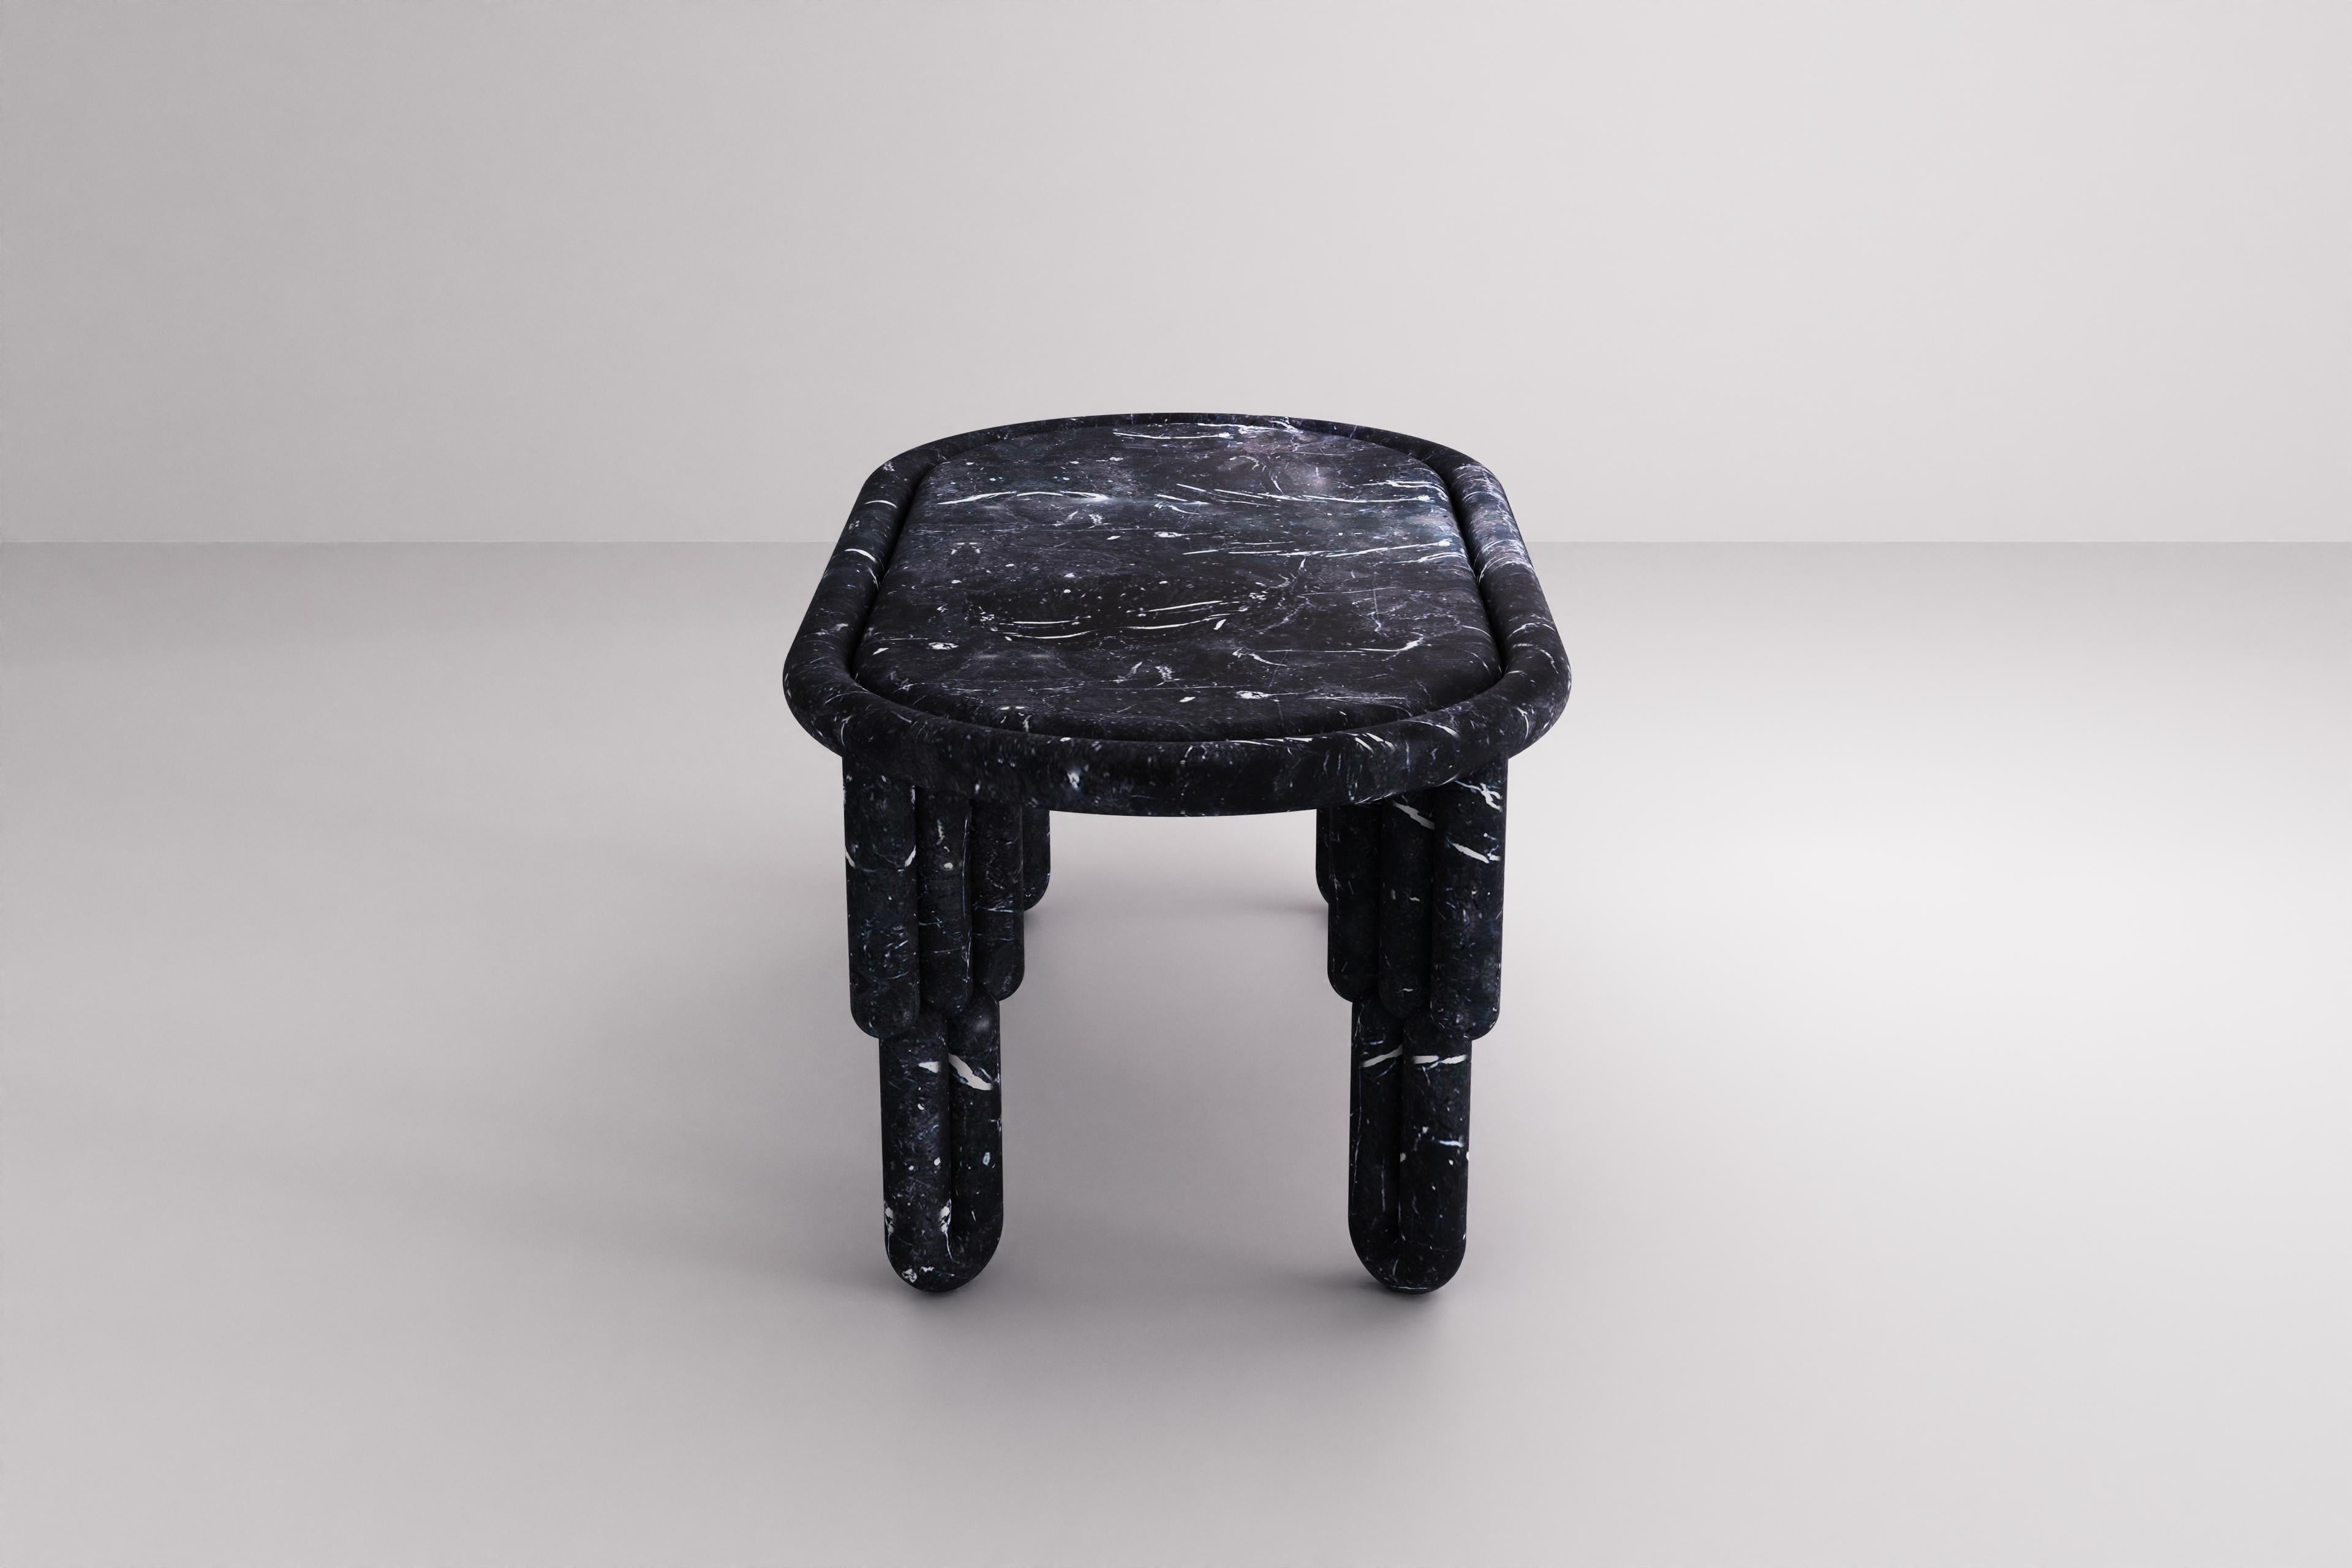 Portuguese Sculptural Kipferl Dining Table by Lara Bohinc in Nero Marquina Marble For Sale